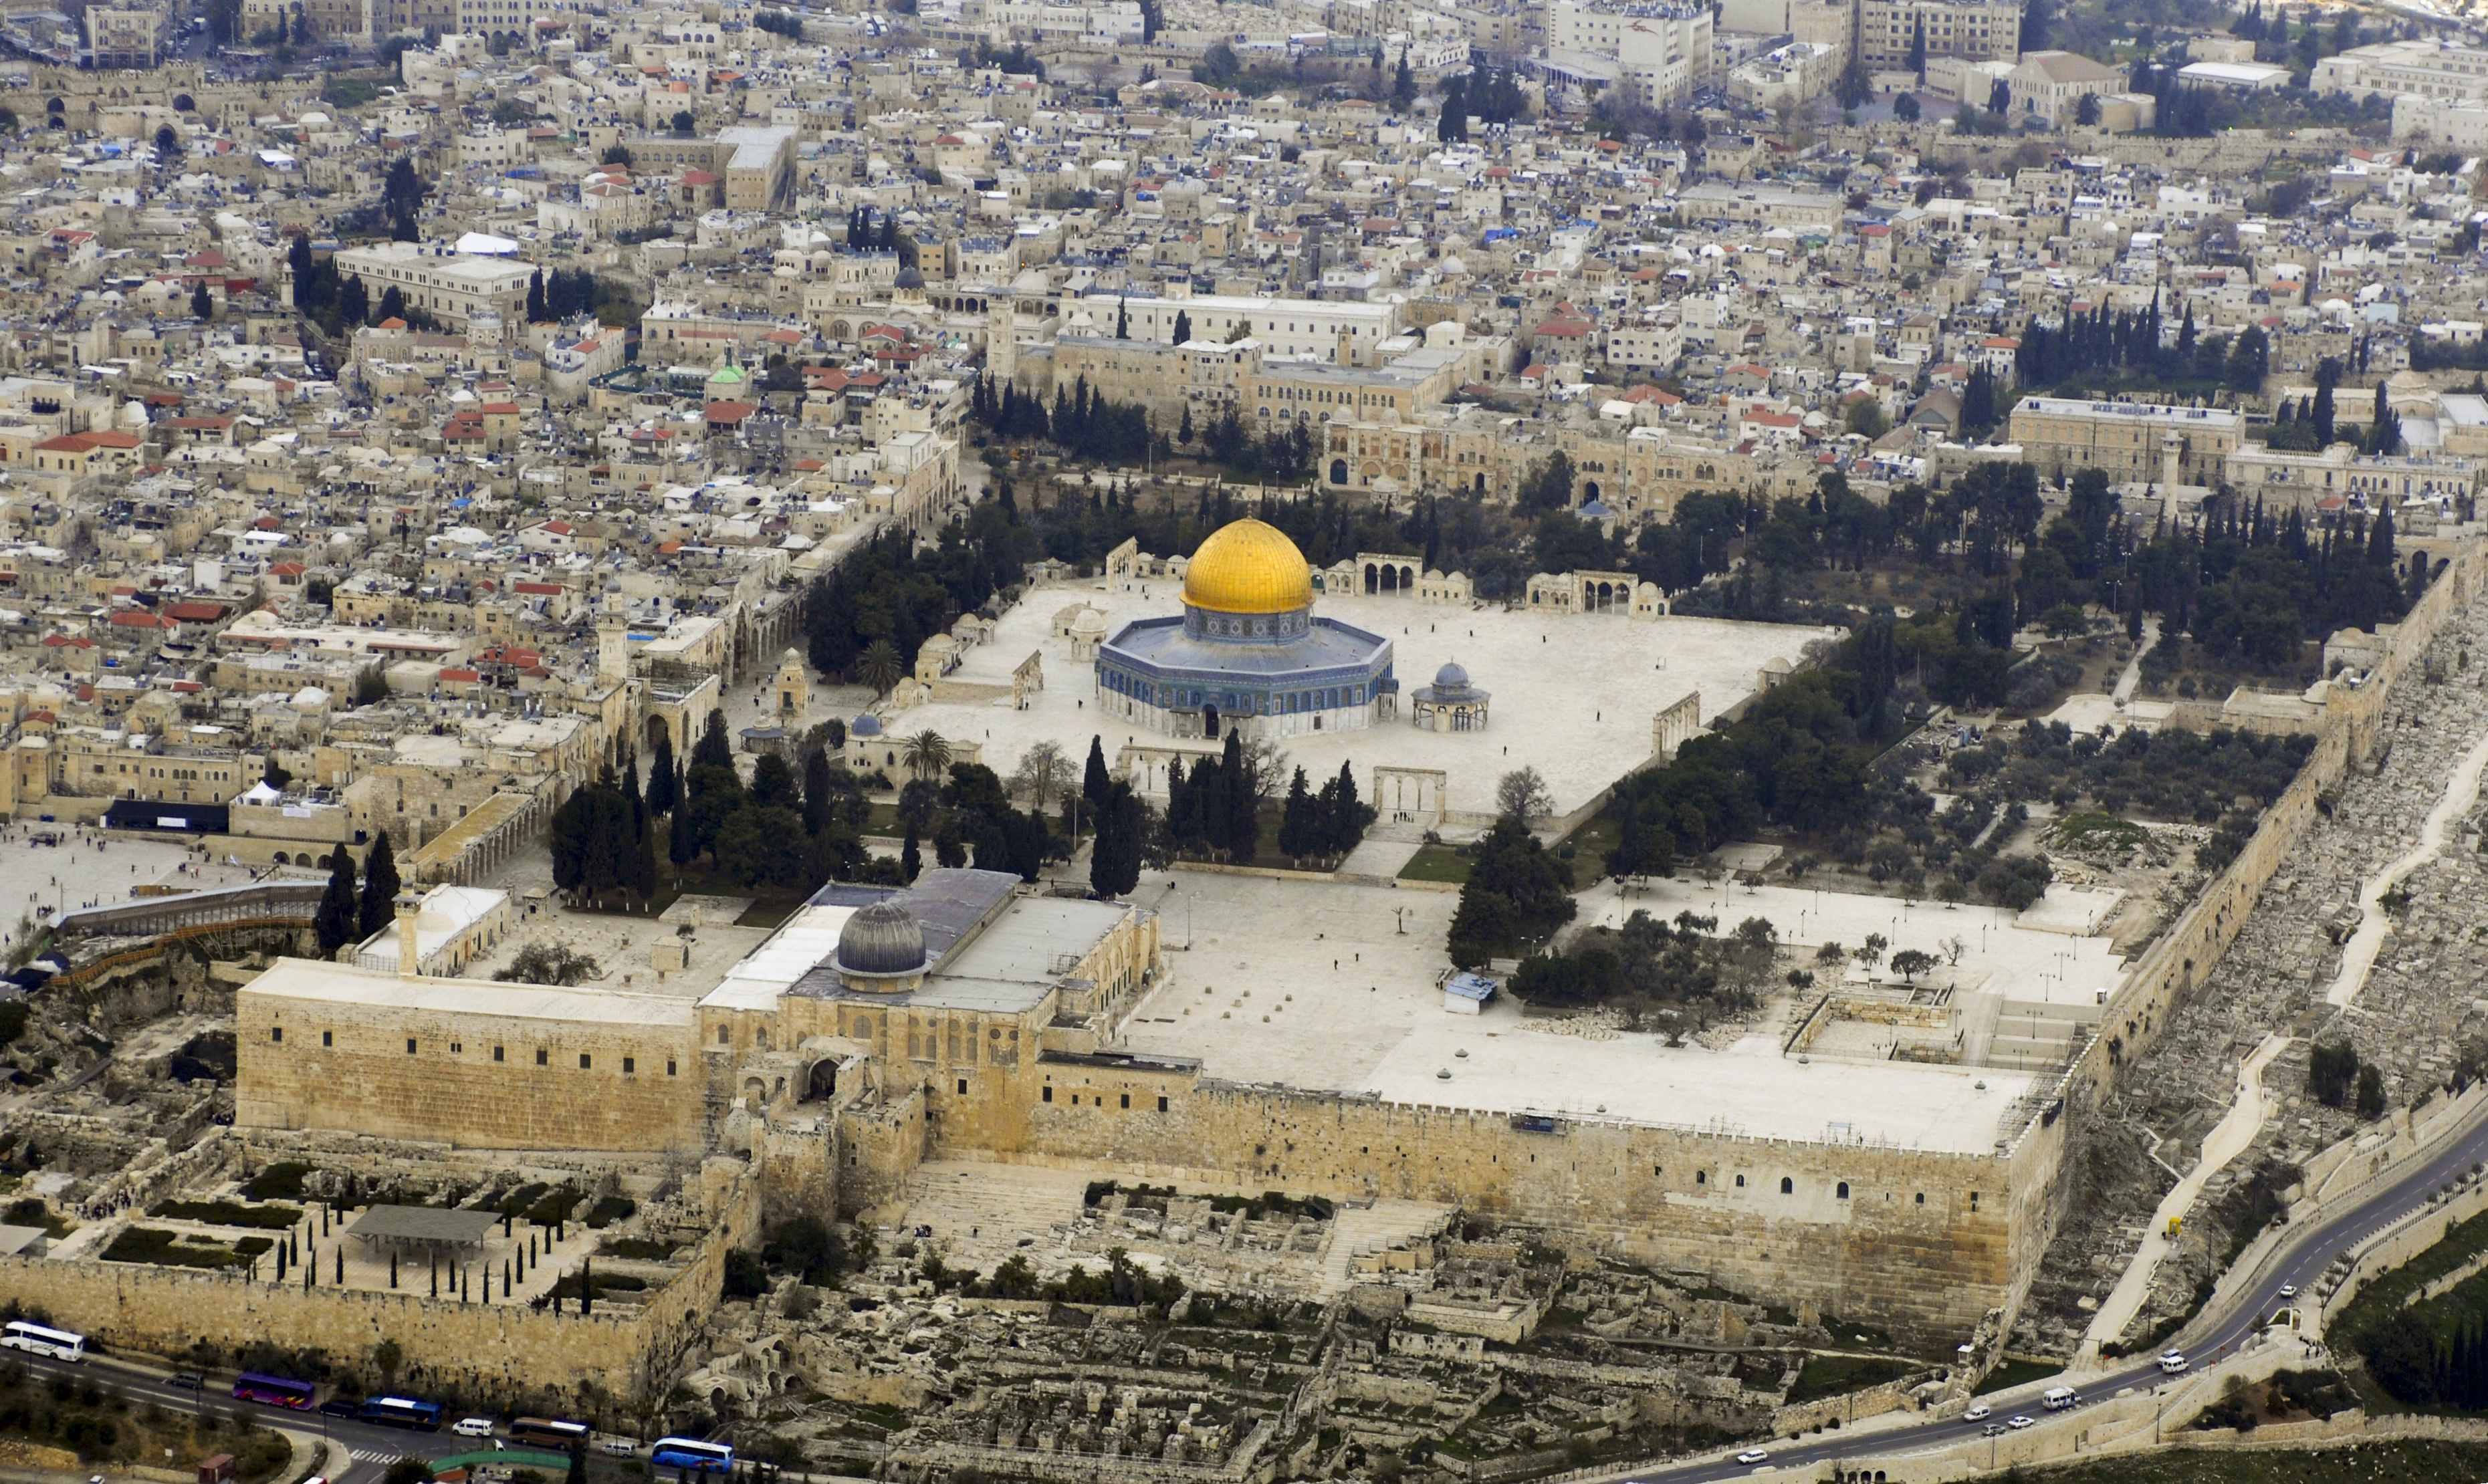 Jerusalem Holy Site Is Muslim, Not Jewish: United Nations Vote Sparks Debate Over Temple Mount And Jewish Ties